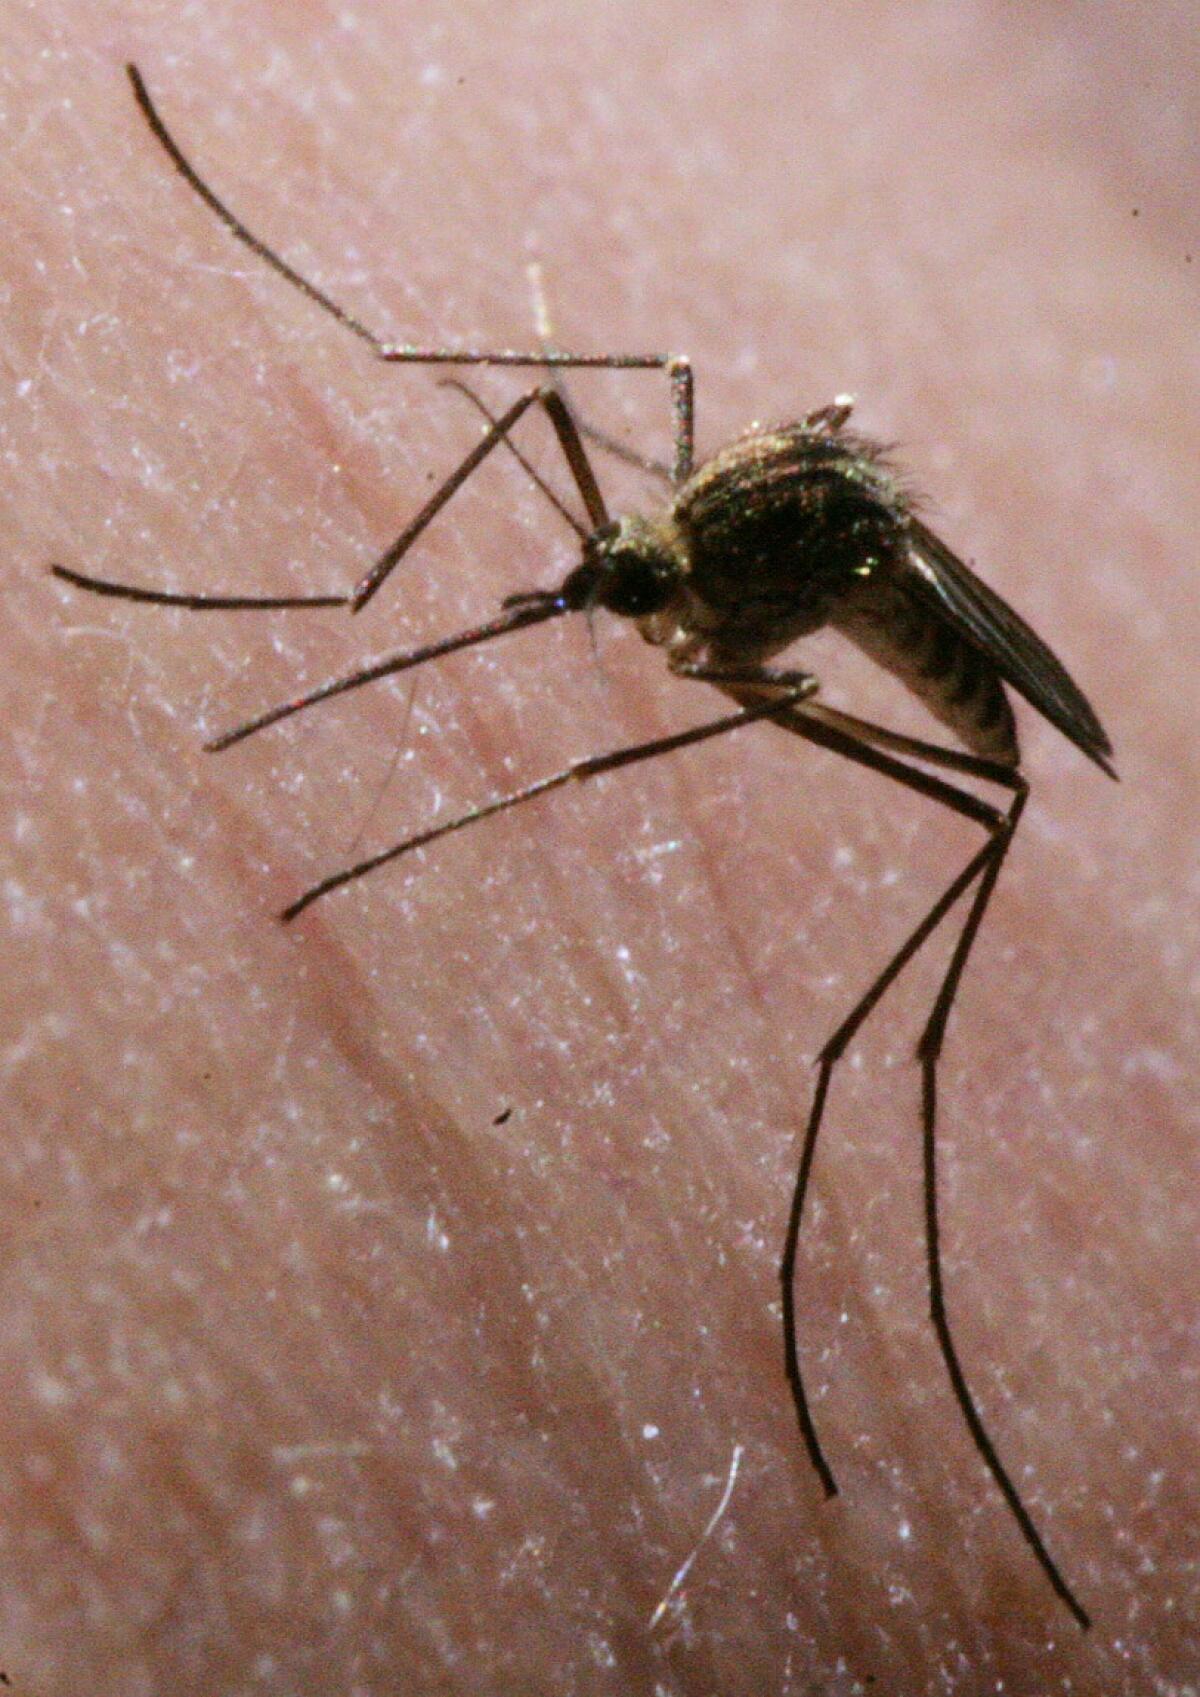 A release issued by the city of La Cañada Flintridge on Friday said the sample was taken in the southeastern portion of the city as part of the district’s ongoing disease surveillance program.